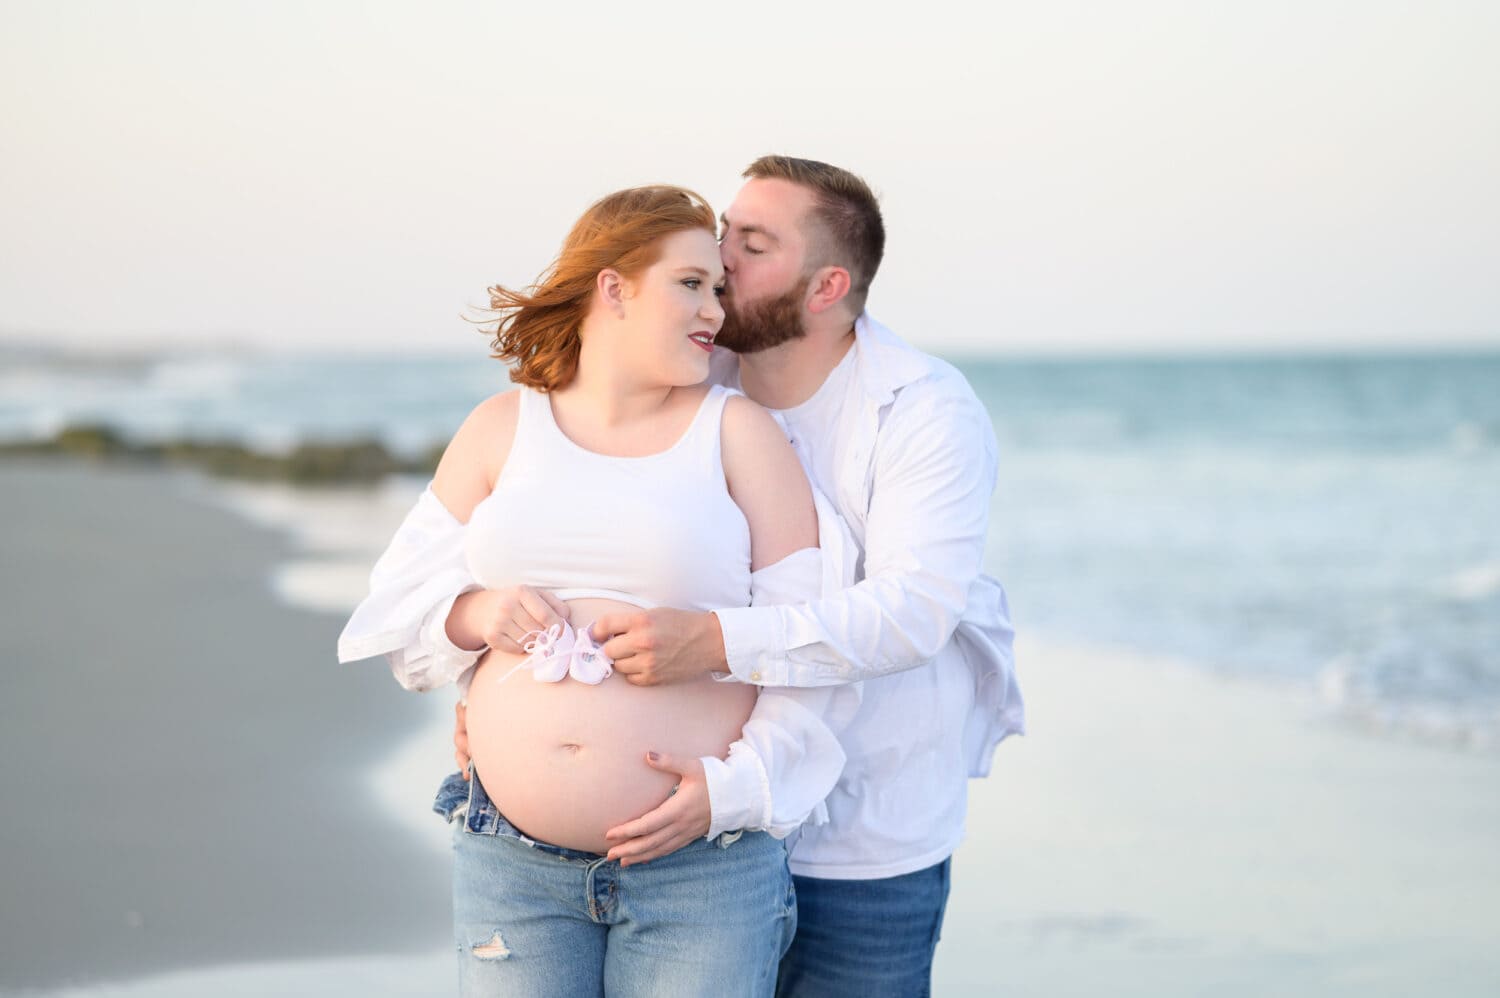 Husband and wife maternity portrait holding baby shoes over the belly - The Pelican Inn